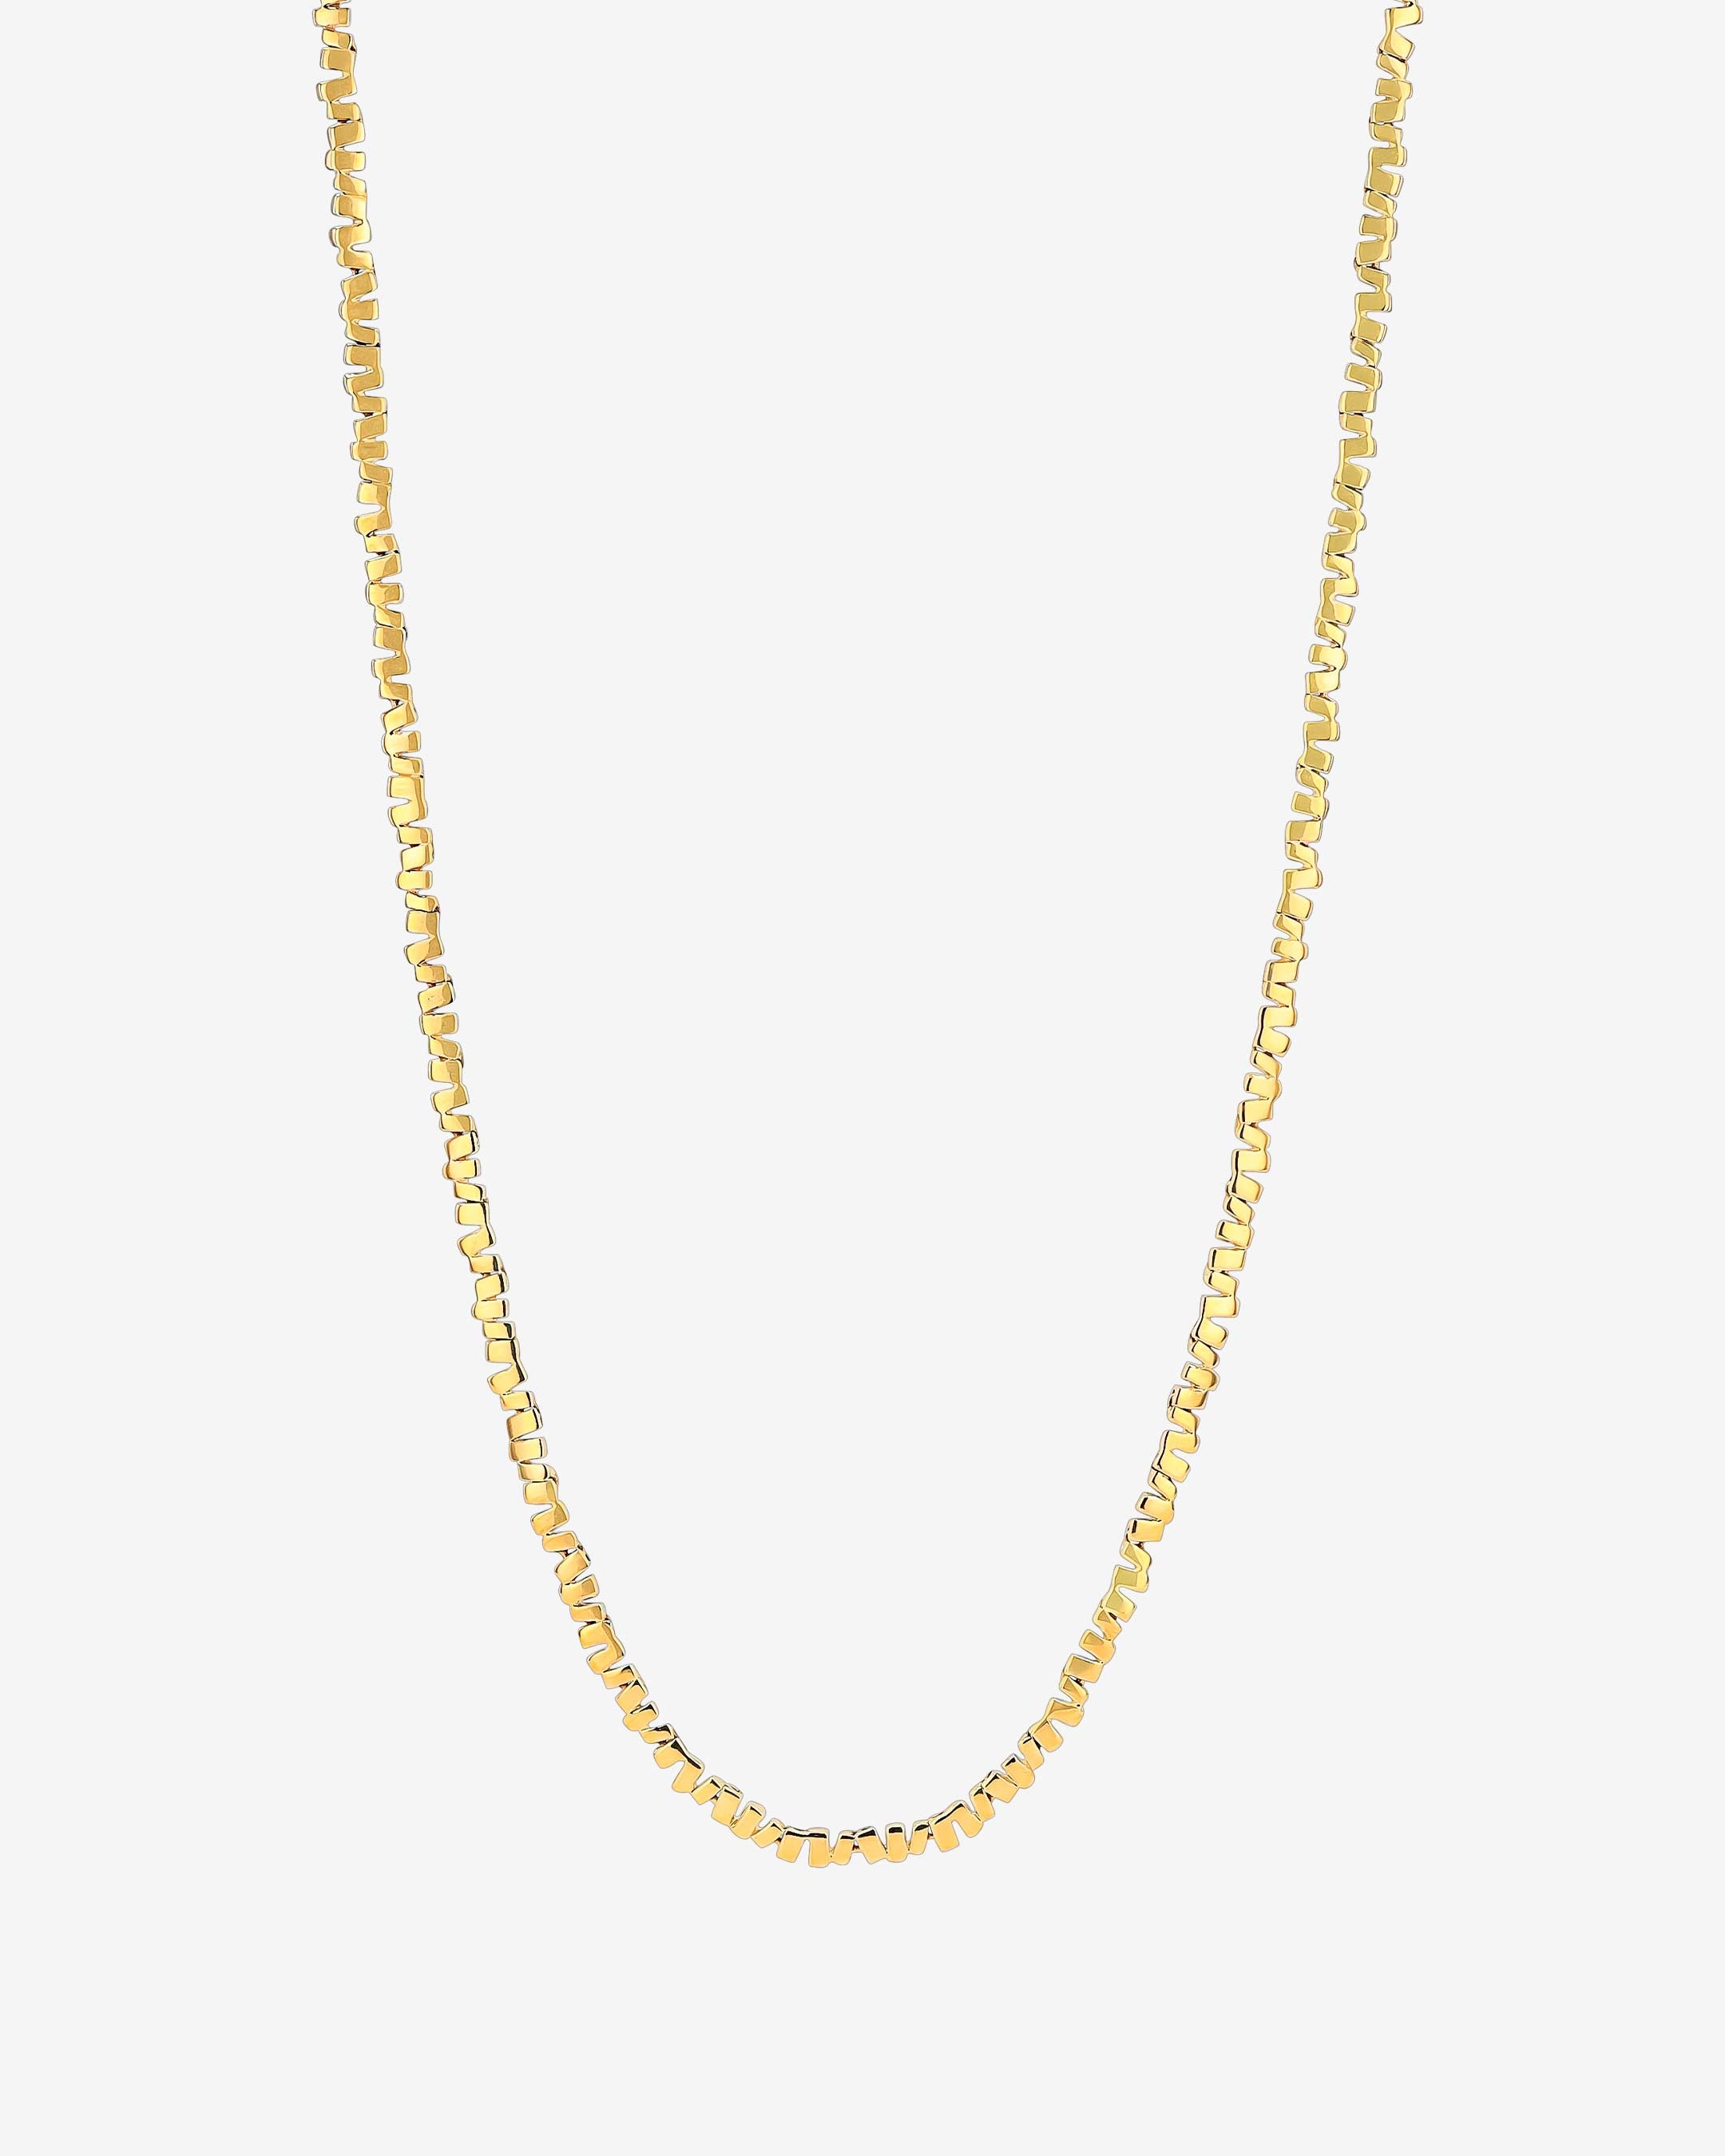 Suzanne Kalan Golden Mini Tennis Necklace in 18k yellow gold